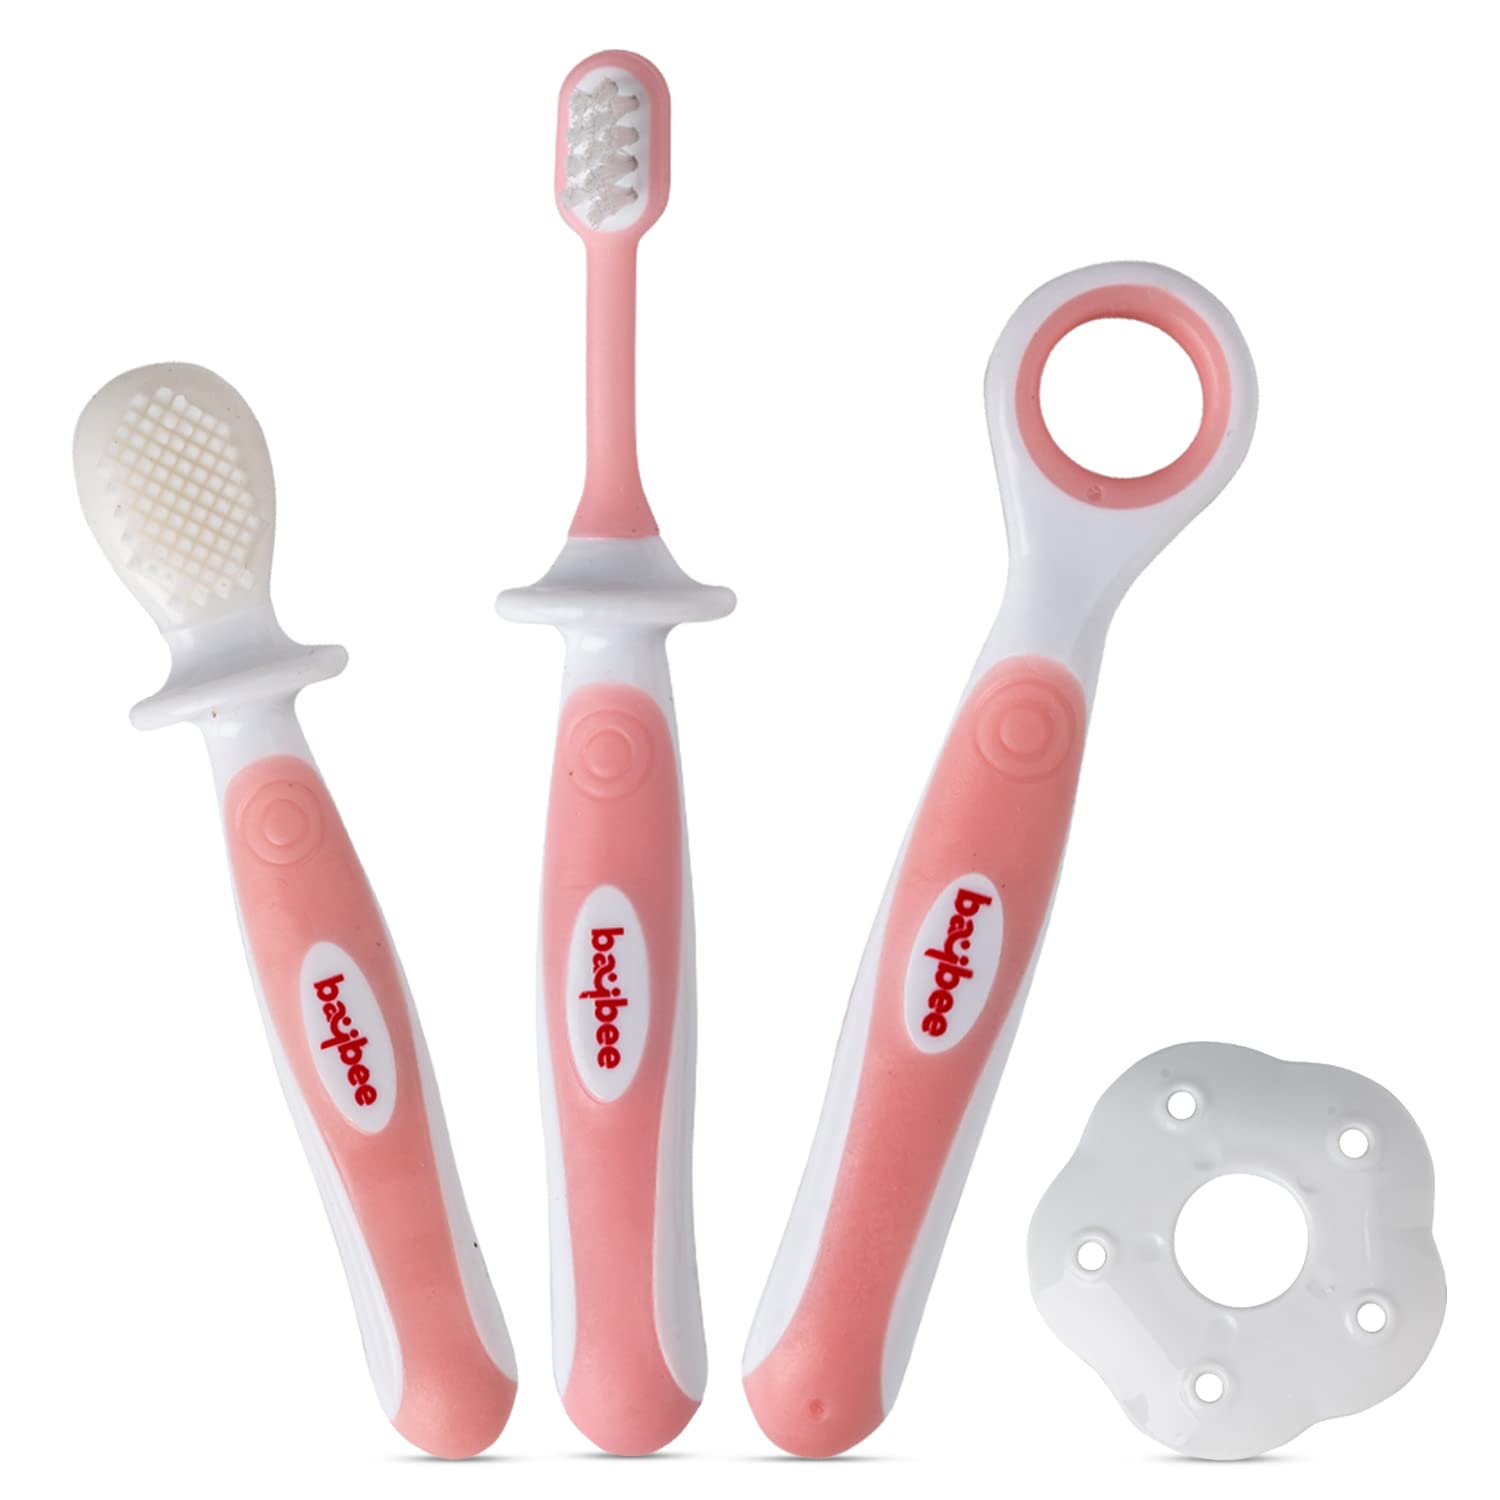 Soft Silicone Baby Toothbrush Set with Anti Chock Shield, Tongue Cleaner - Set of 4 - (Pink) - The Minikin Store